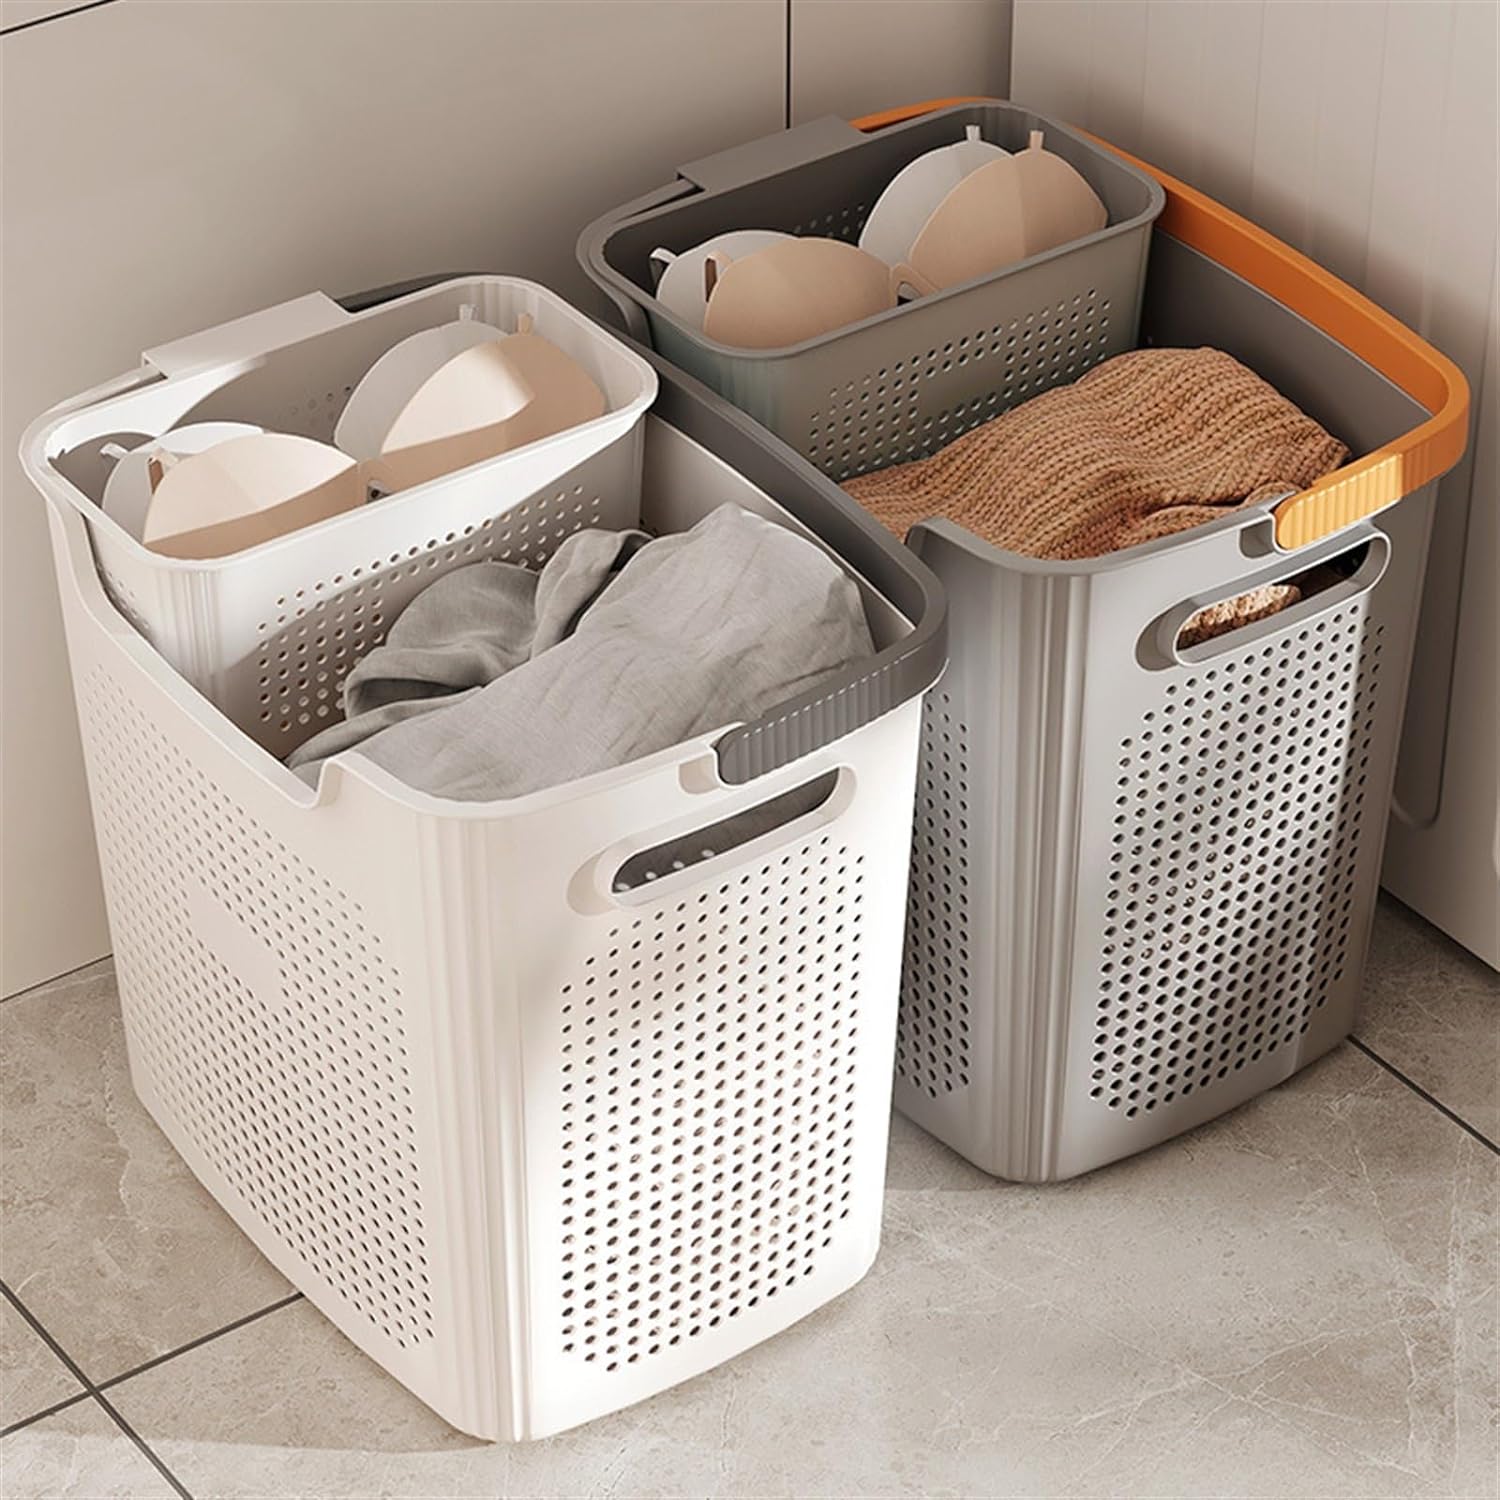 Laundry divided basket